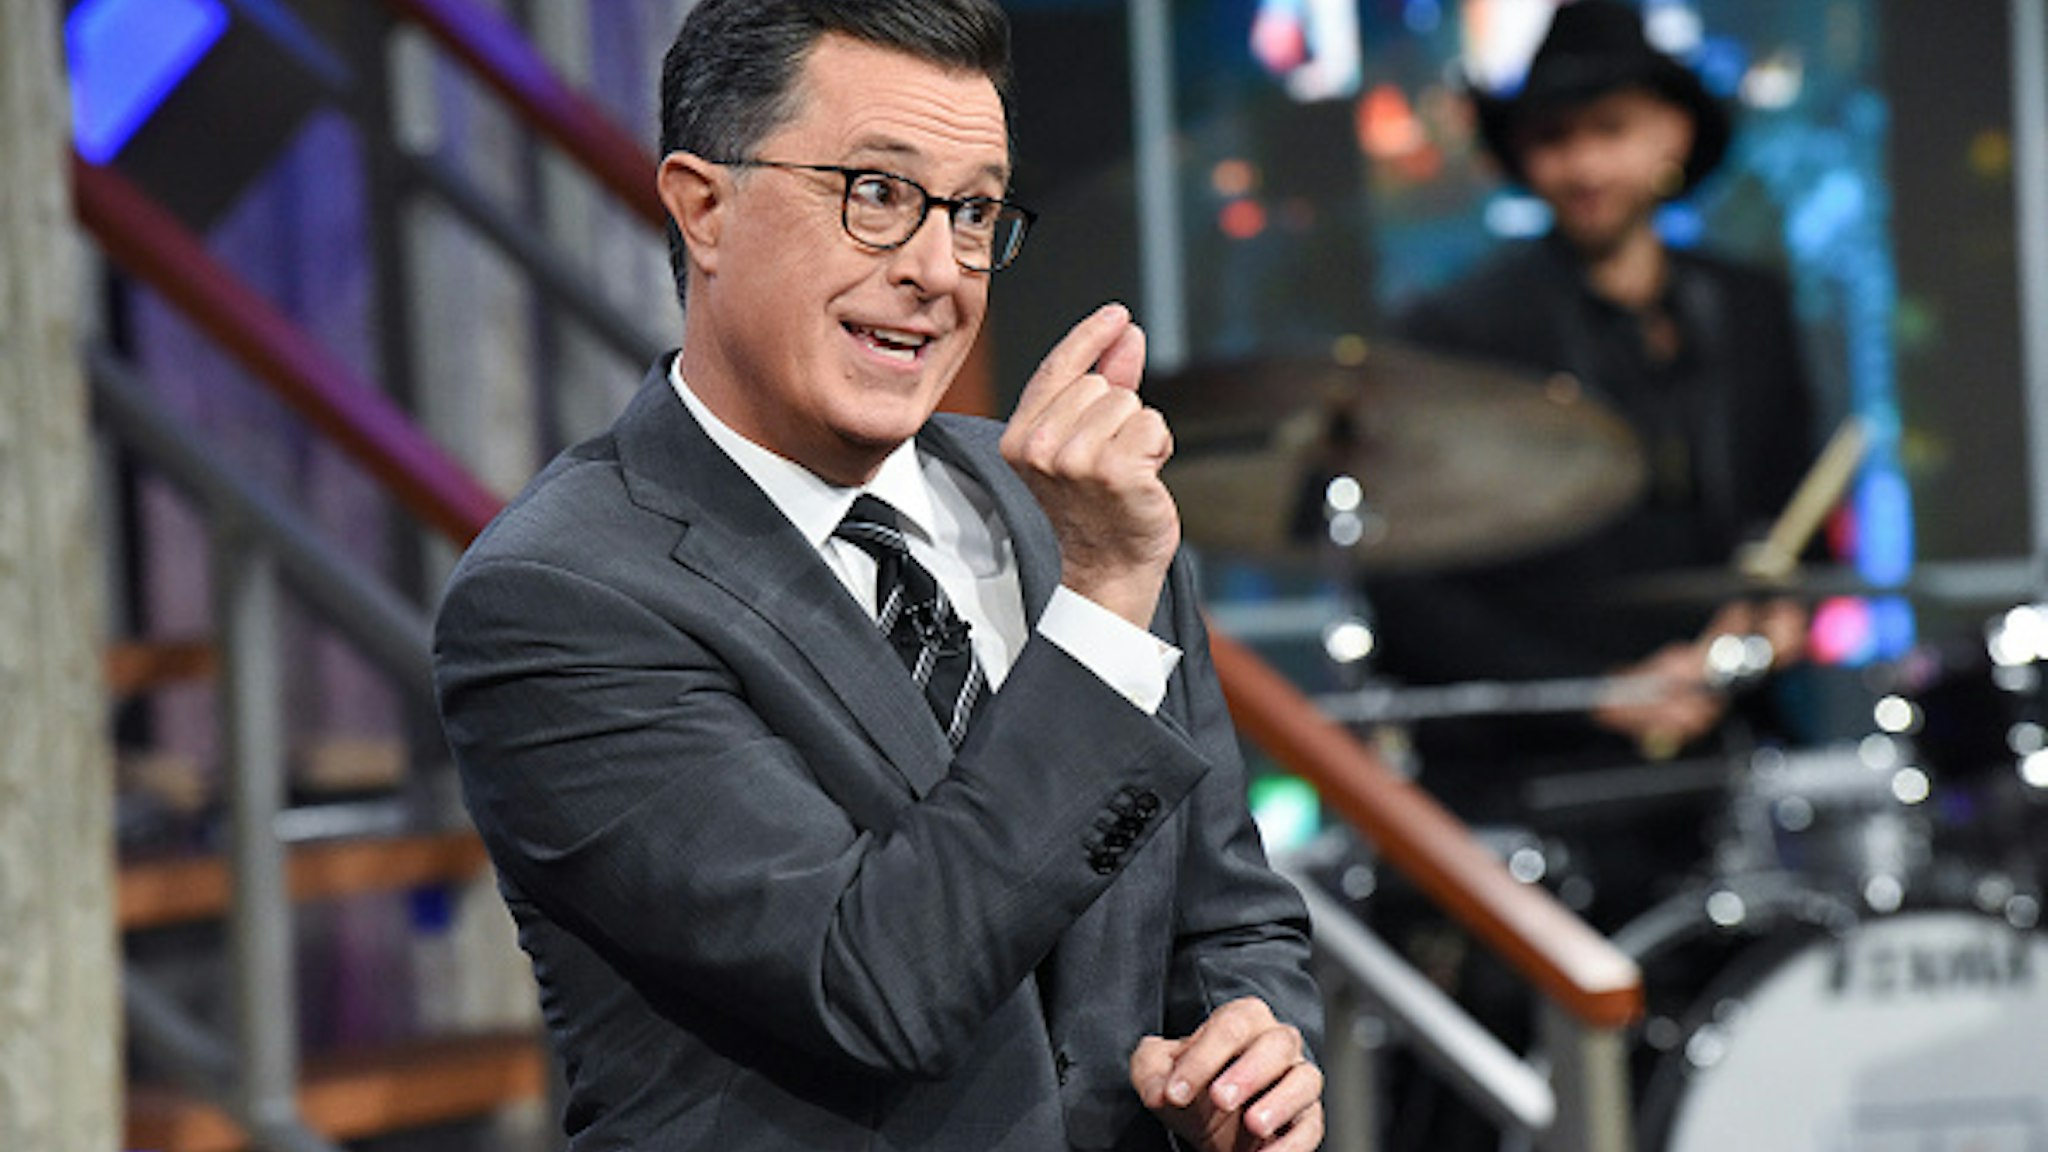 The Late Show with Stephen Colbert during Thursday's September 13, 2019 show